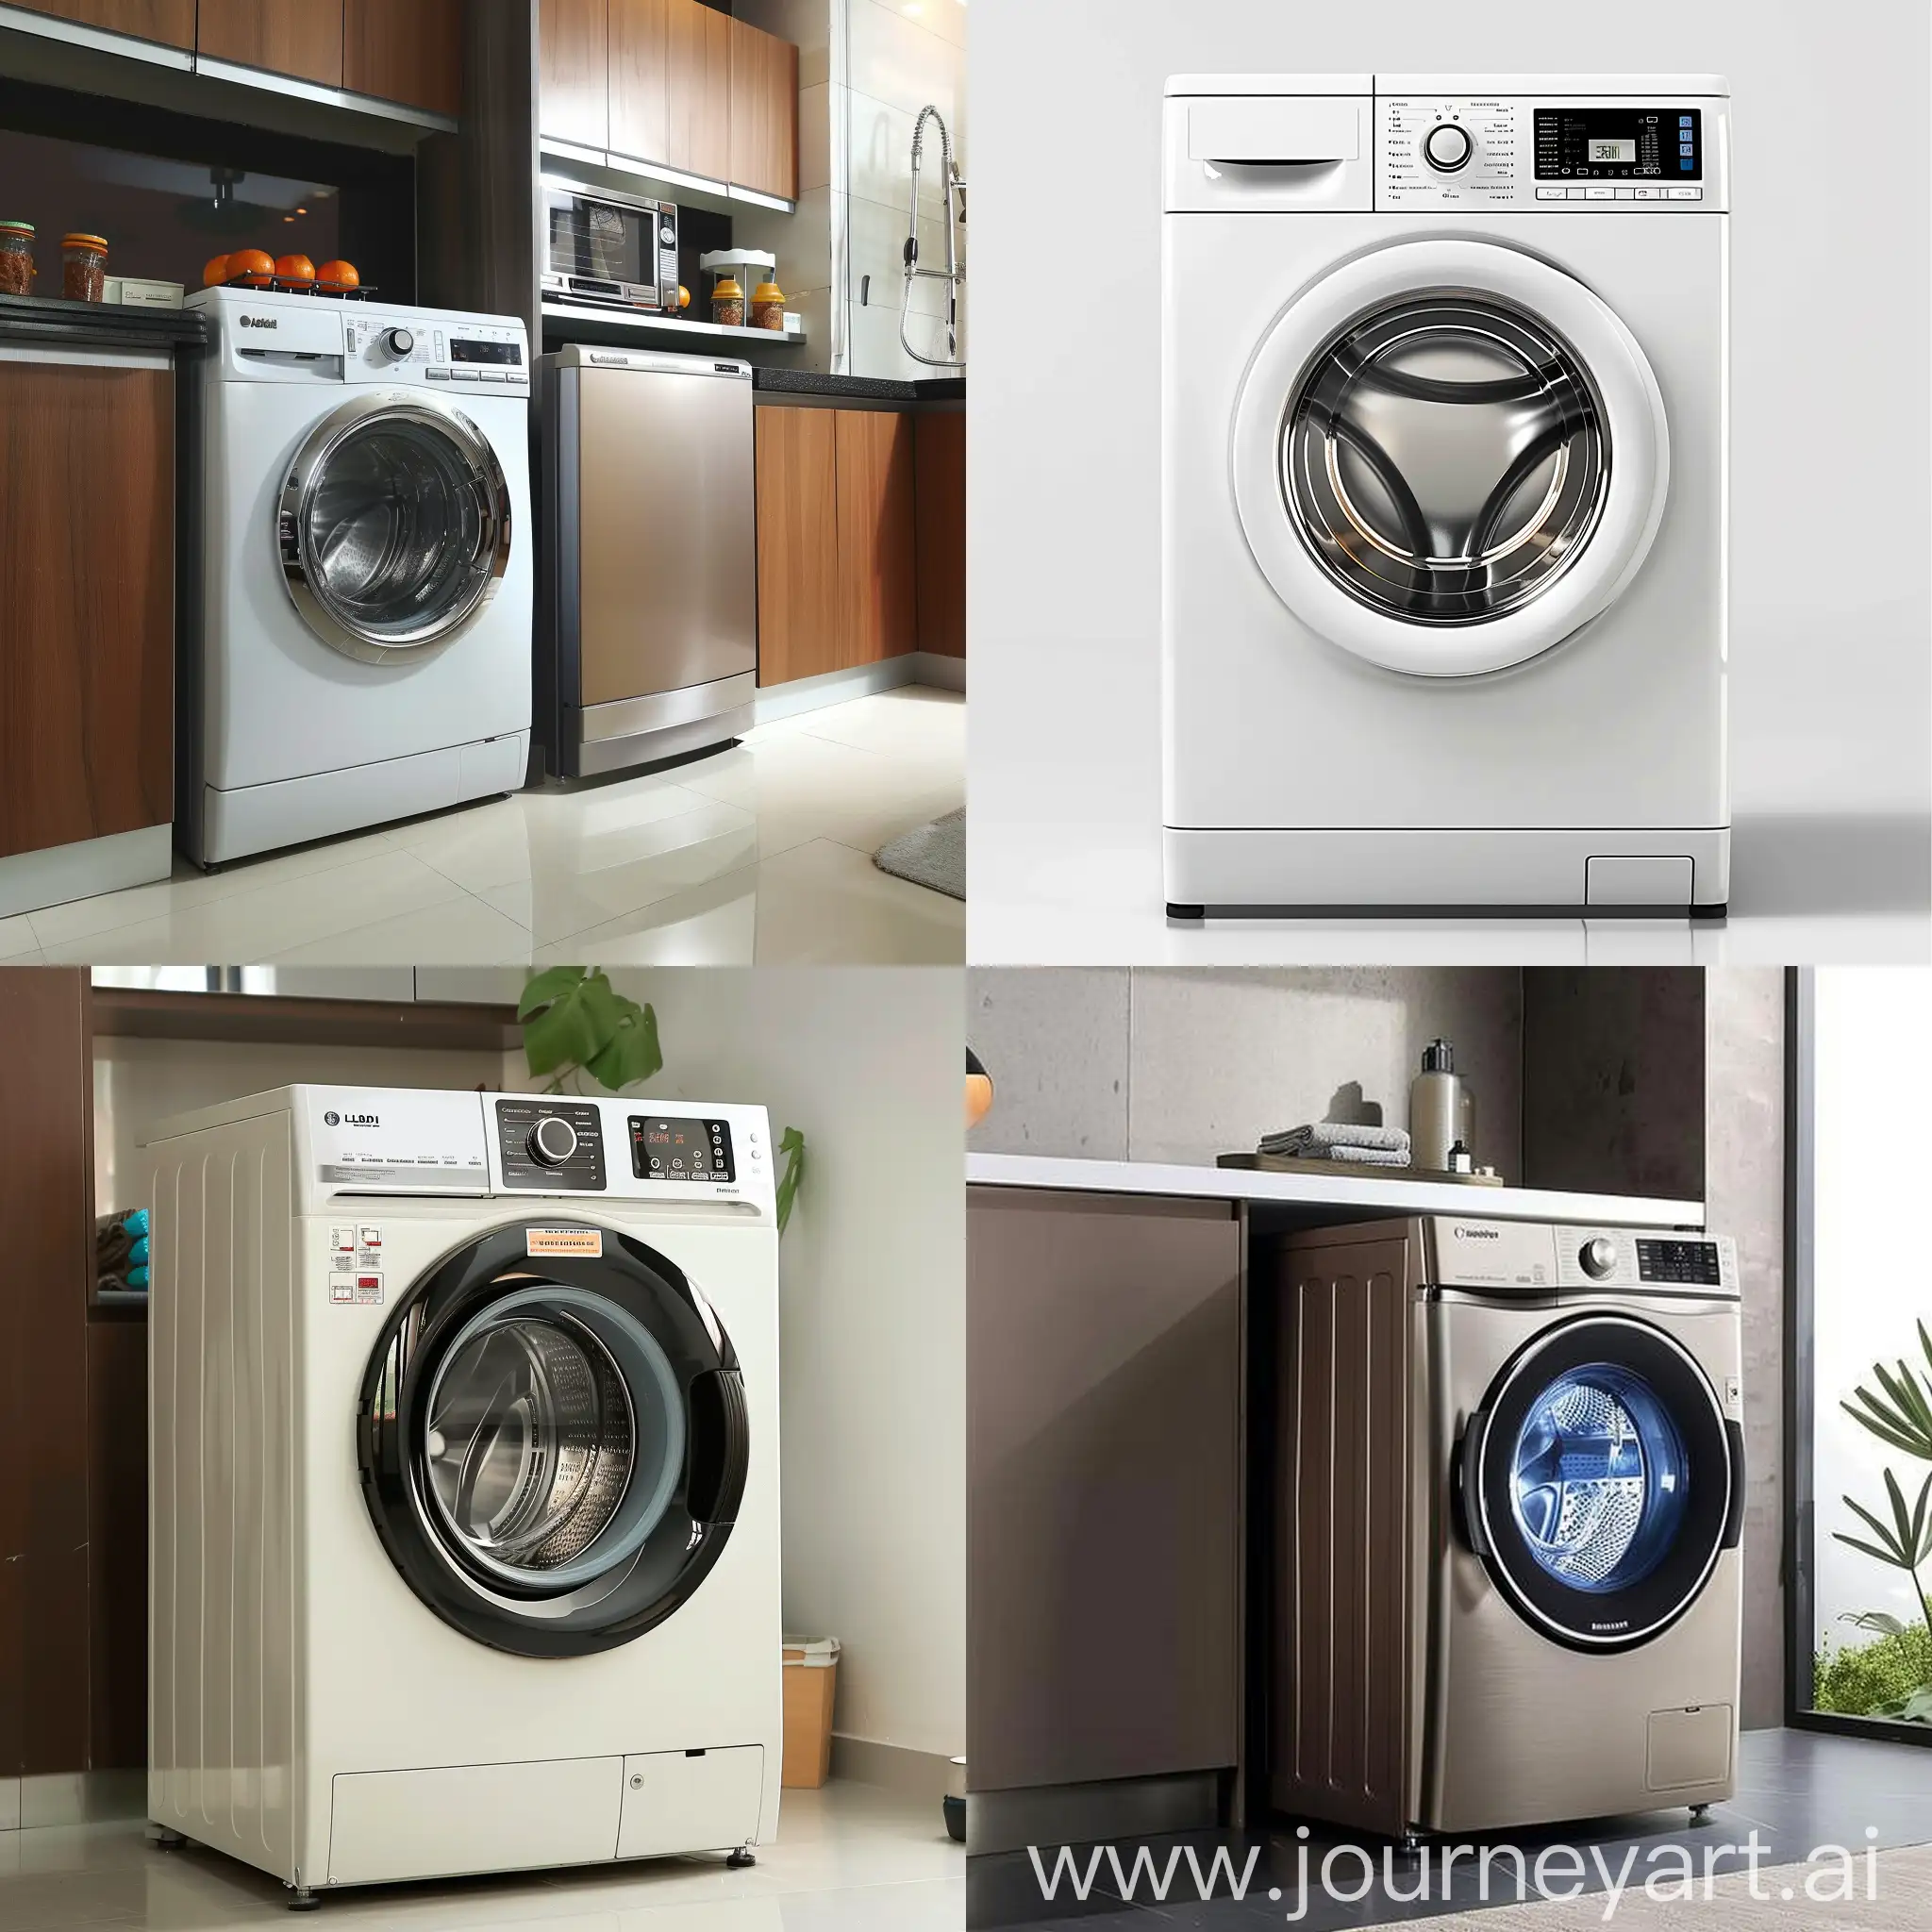 India celebrating Large Appliance appliance independence day sale 